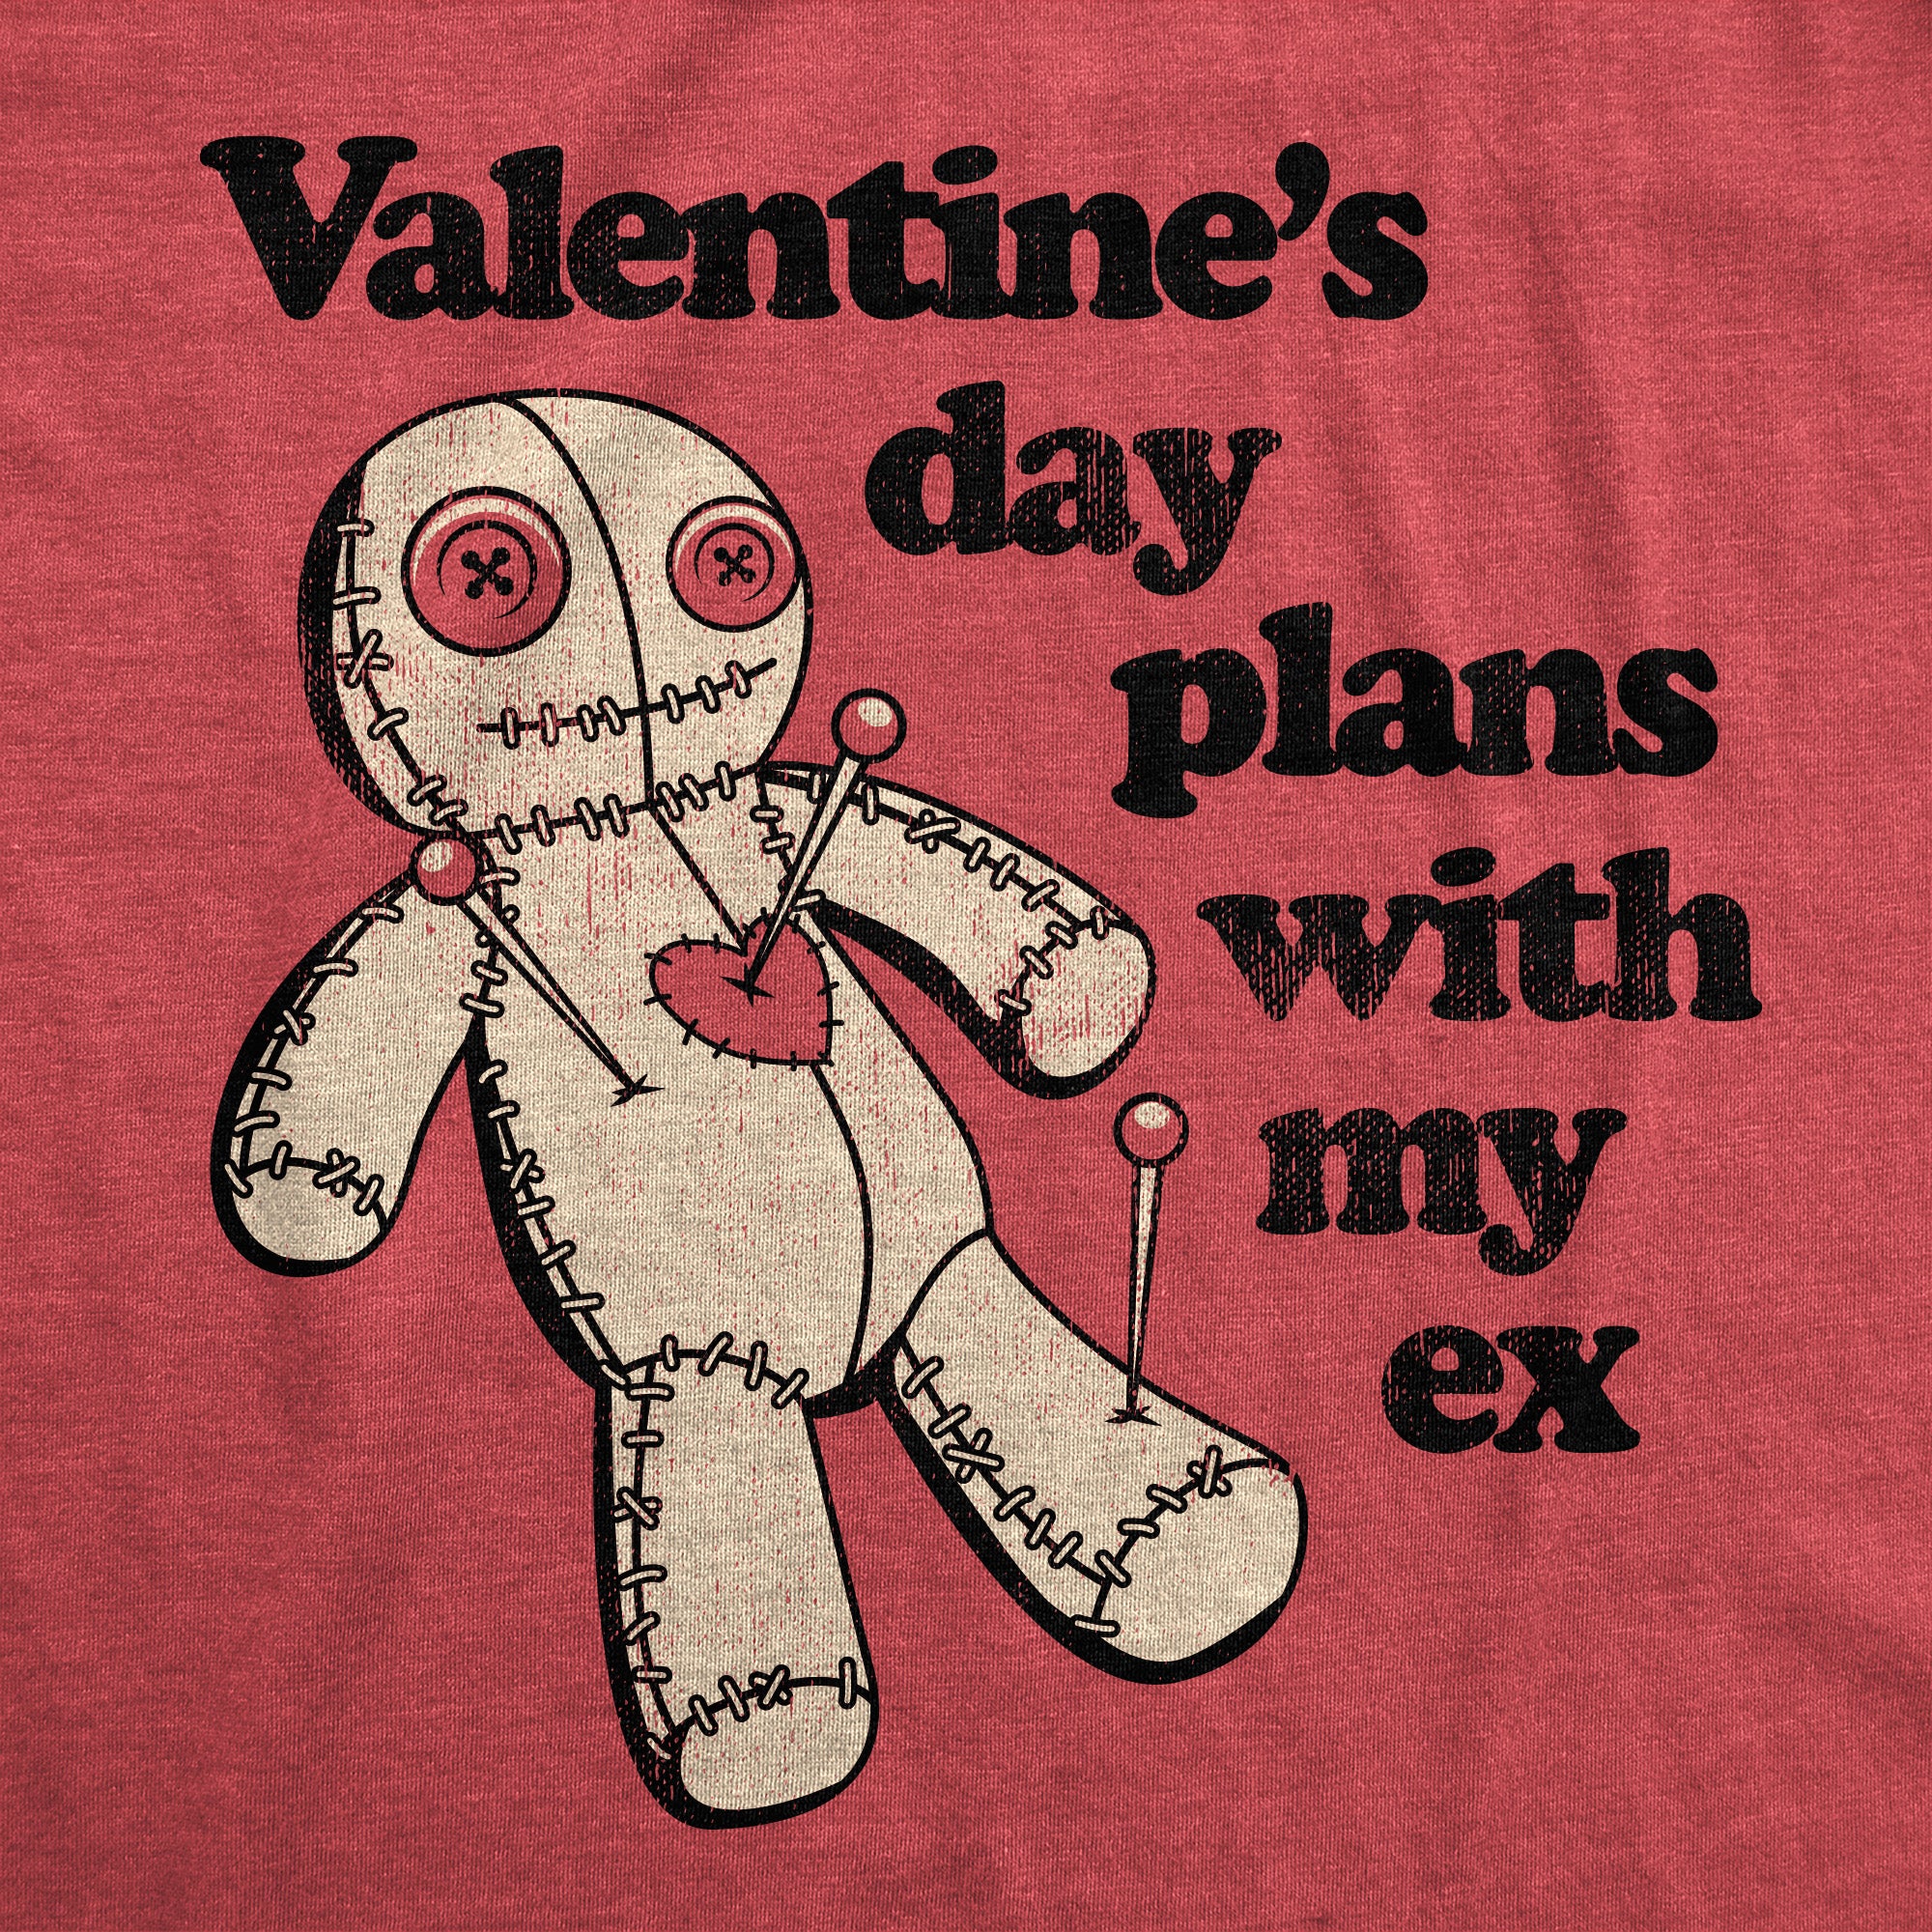 Funny Heather Red - EX Valentines Day Plans With My Ex Womens T Shirt Nerdy Valentine's Day Sarcastic Tee